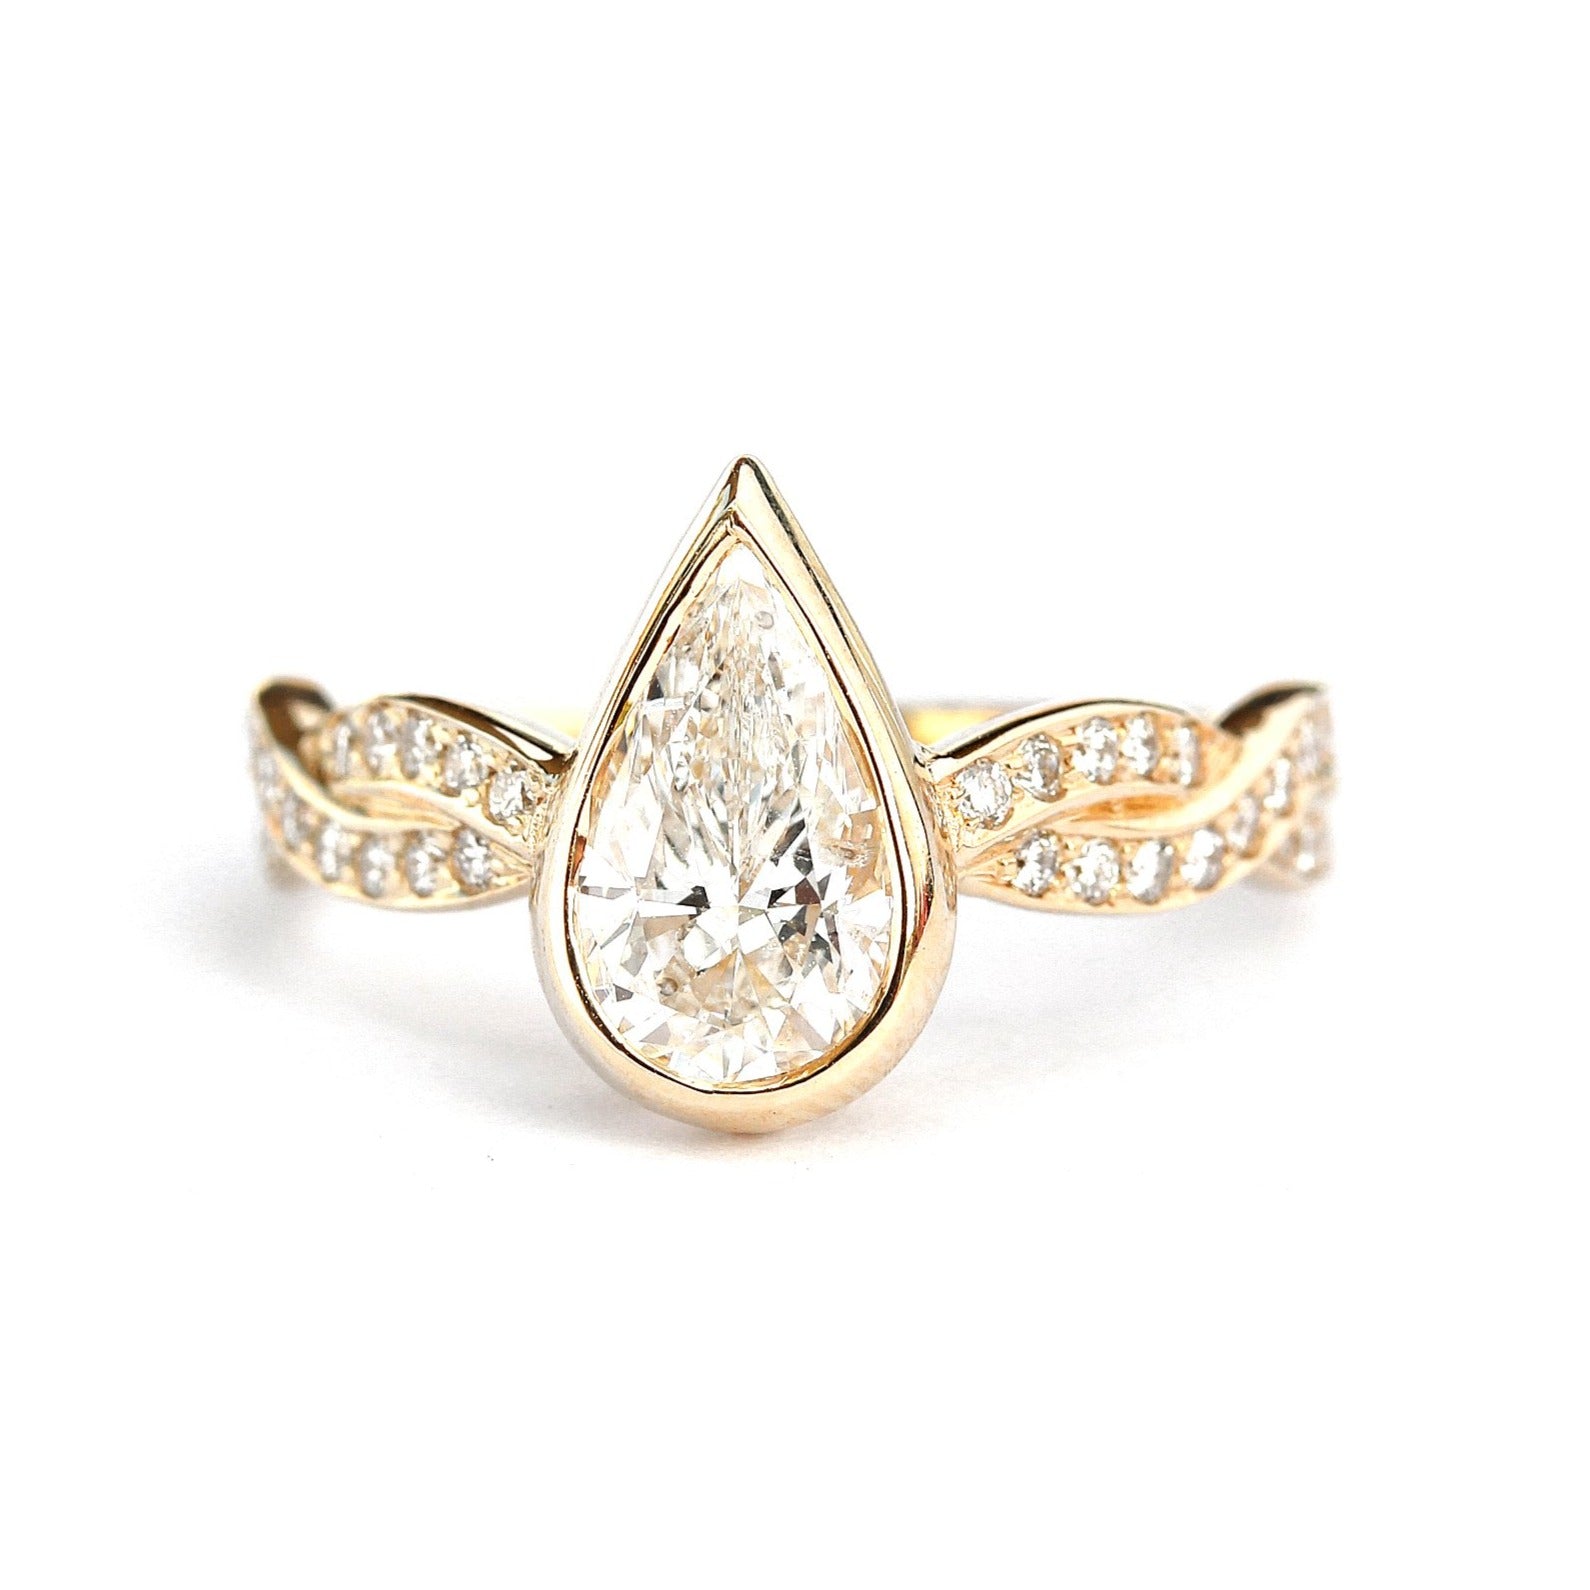 Pear Diamond Bezel Engagement Ring "Dragonfly" with "Iceland" ring guard enhancer ♥